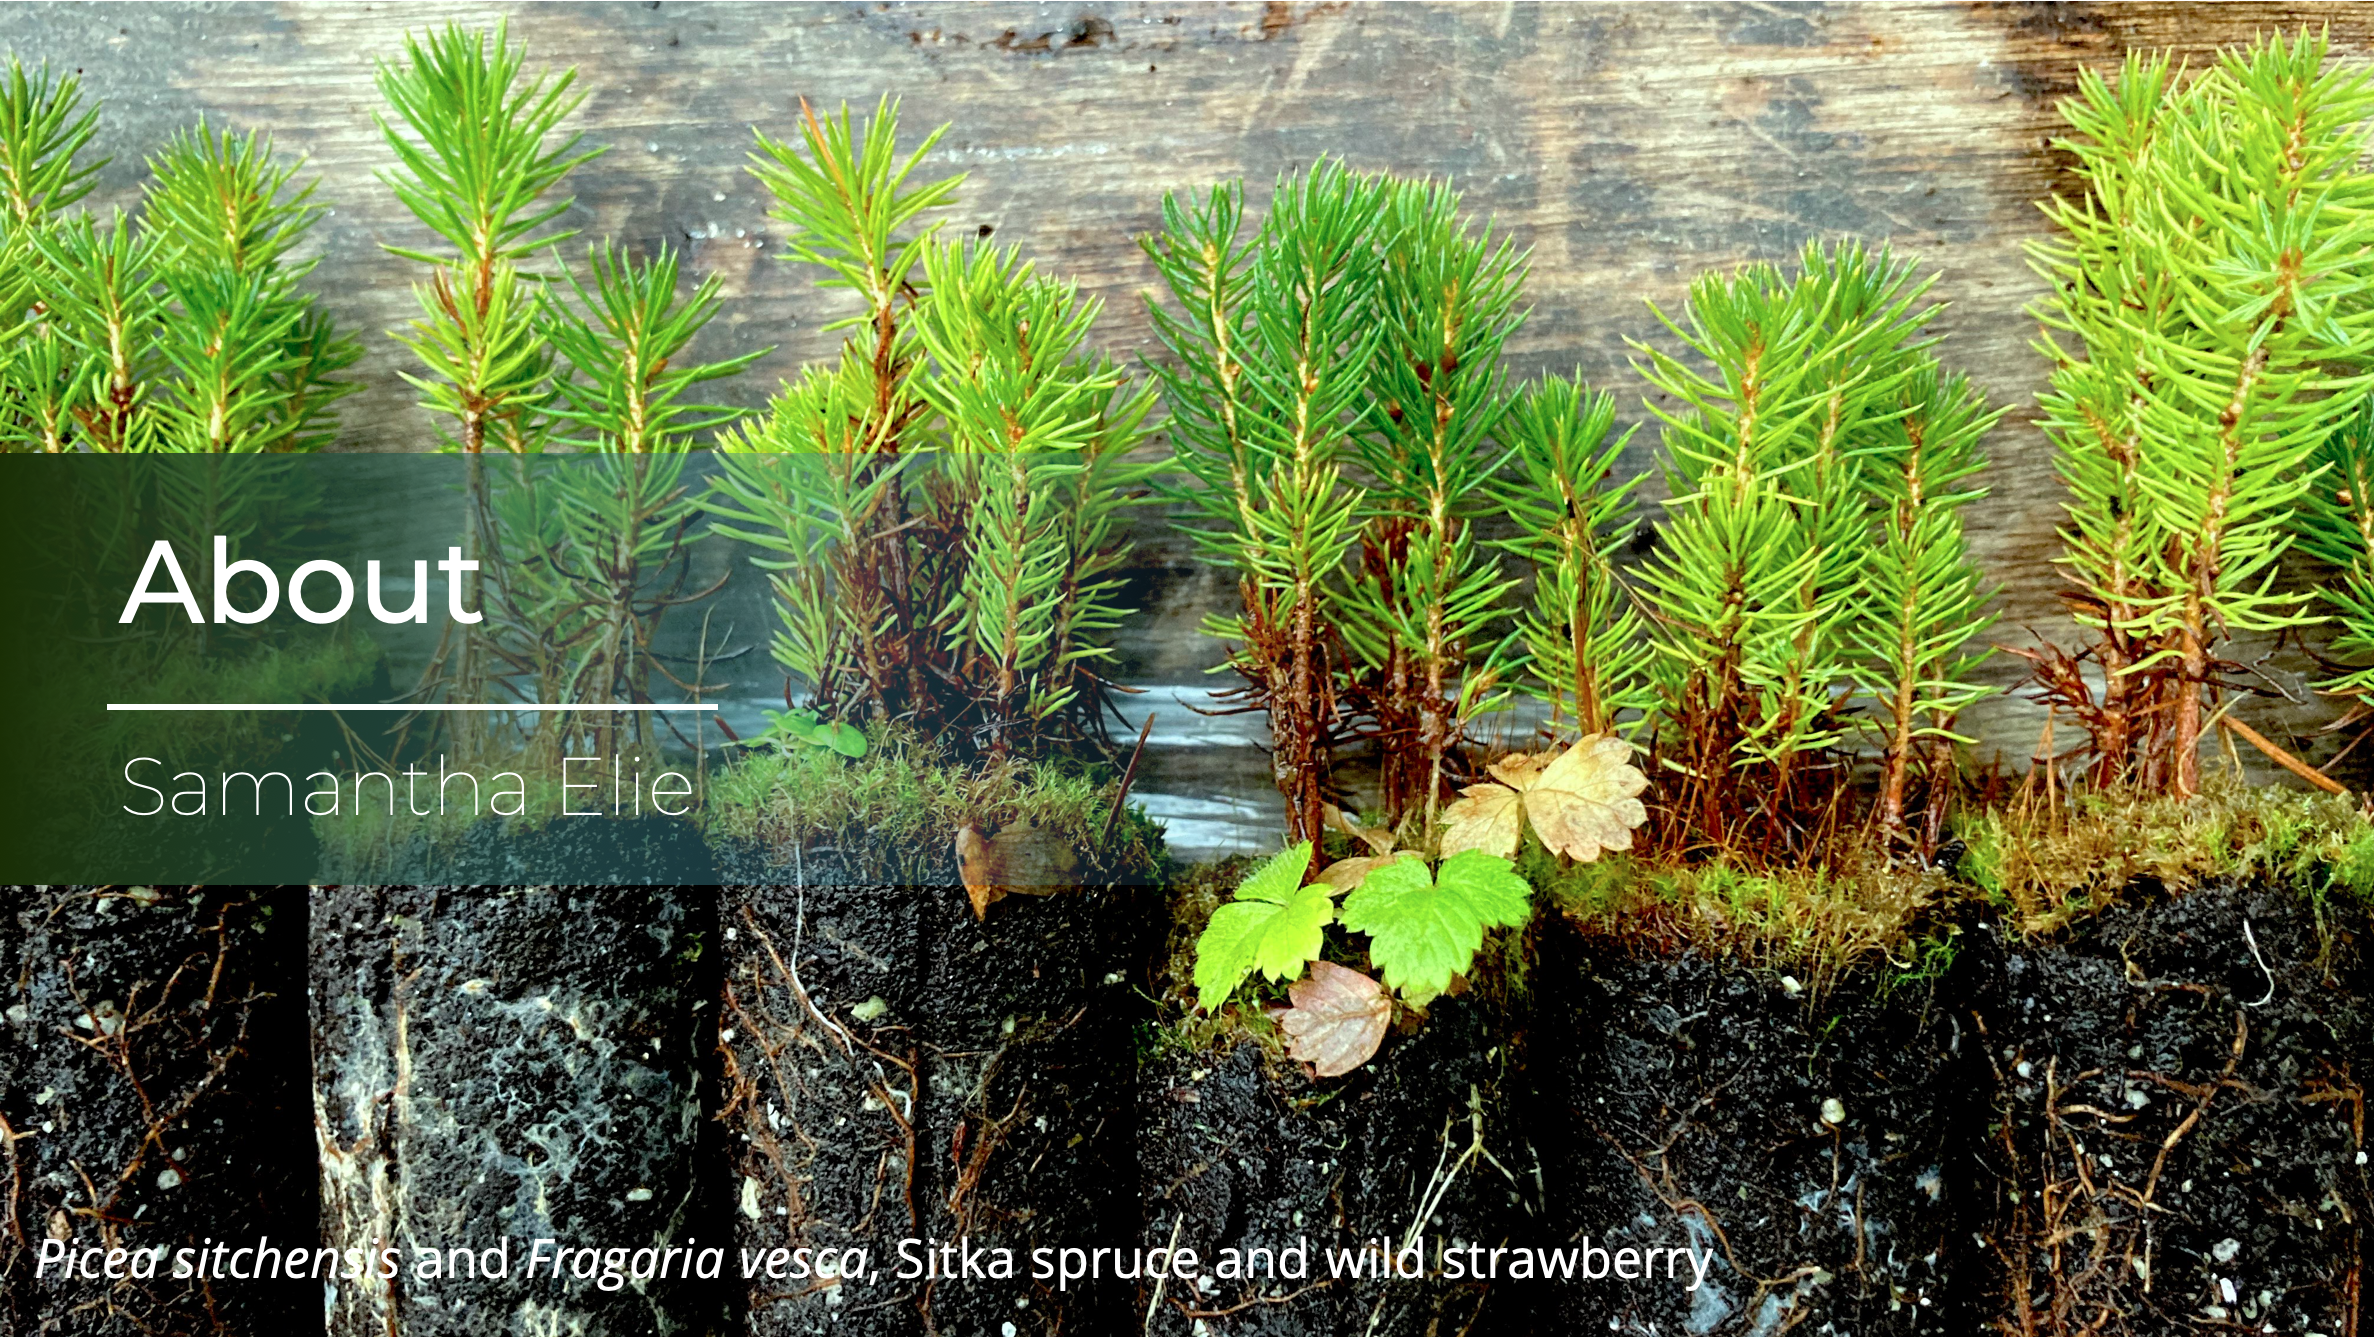 Photo of Picea sitchensis seedling plugs with a Fragaria vesca volunteer and the text "About Samantha Elie"